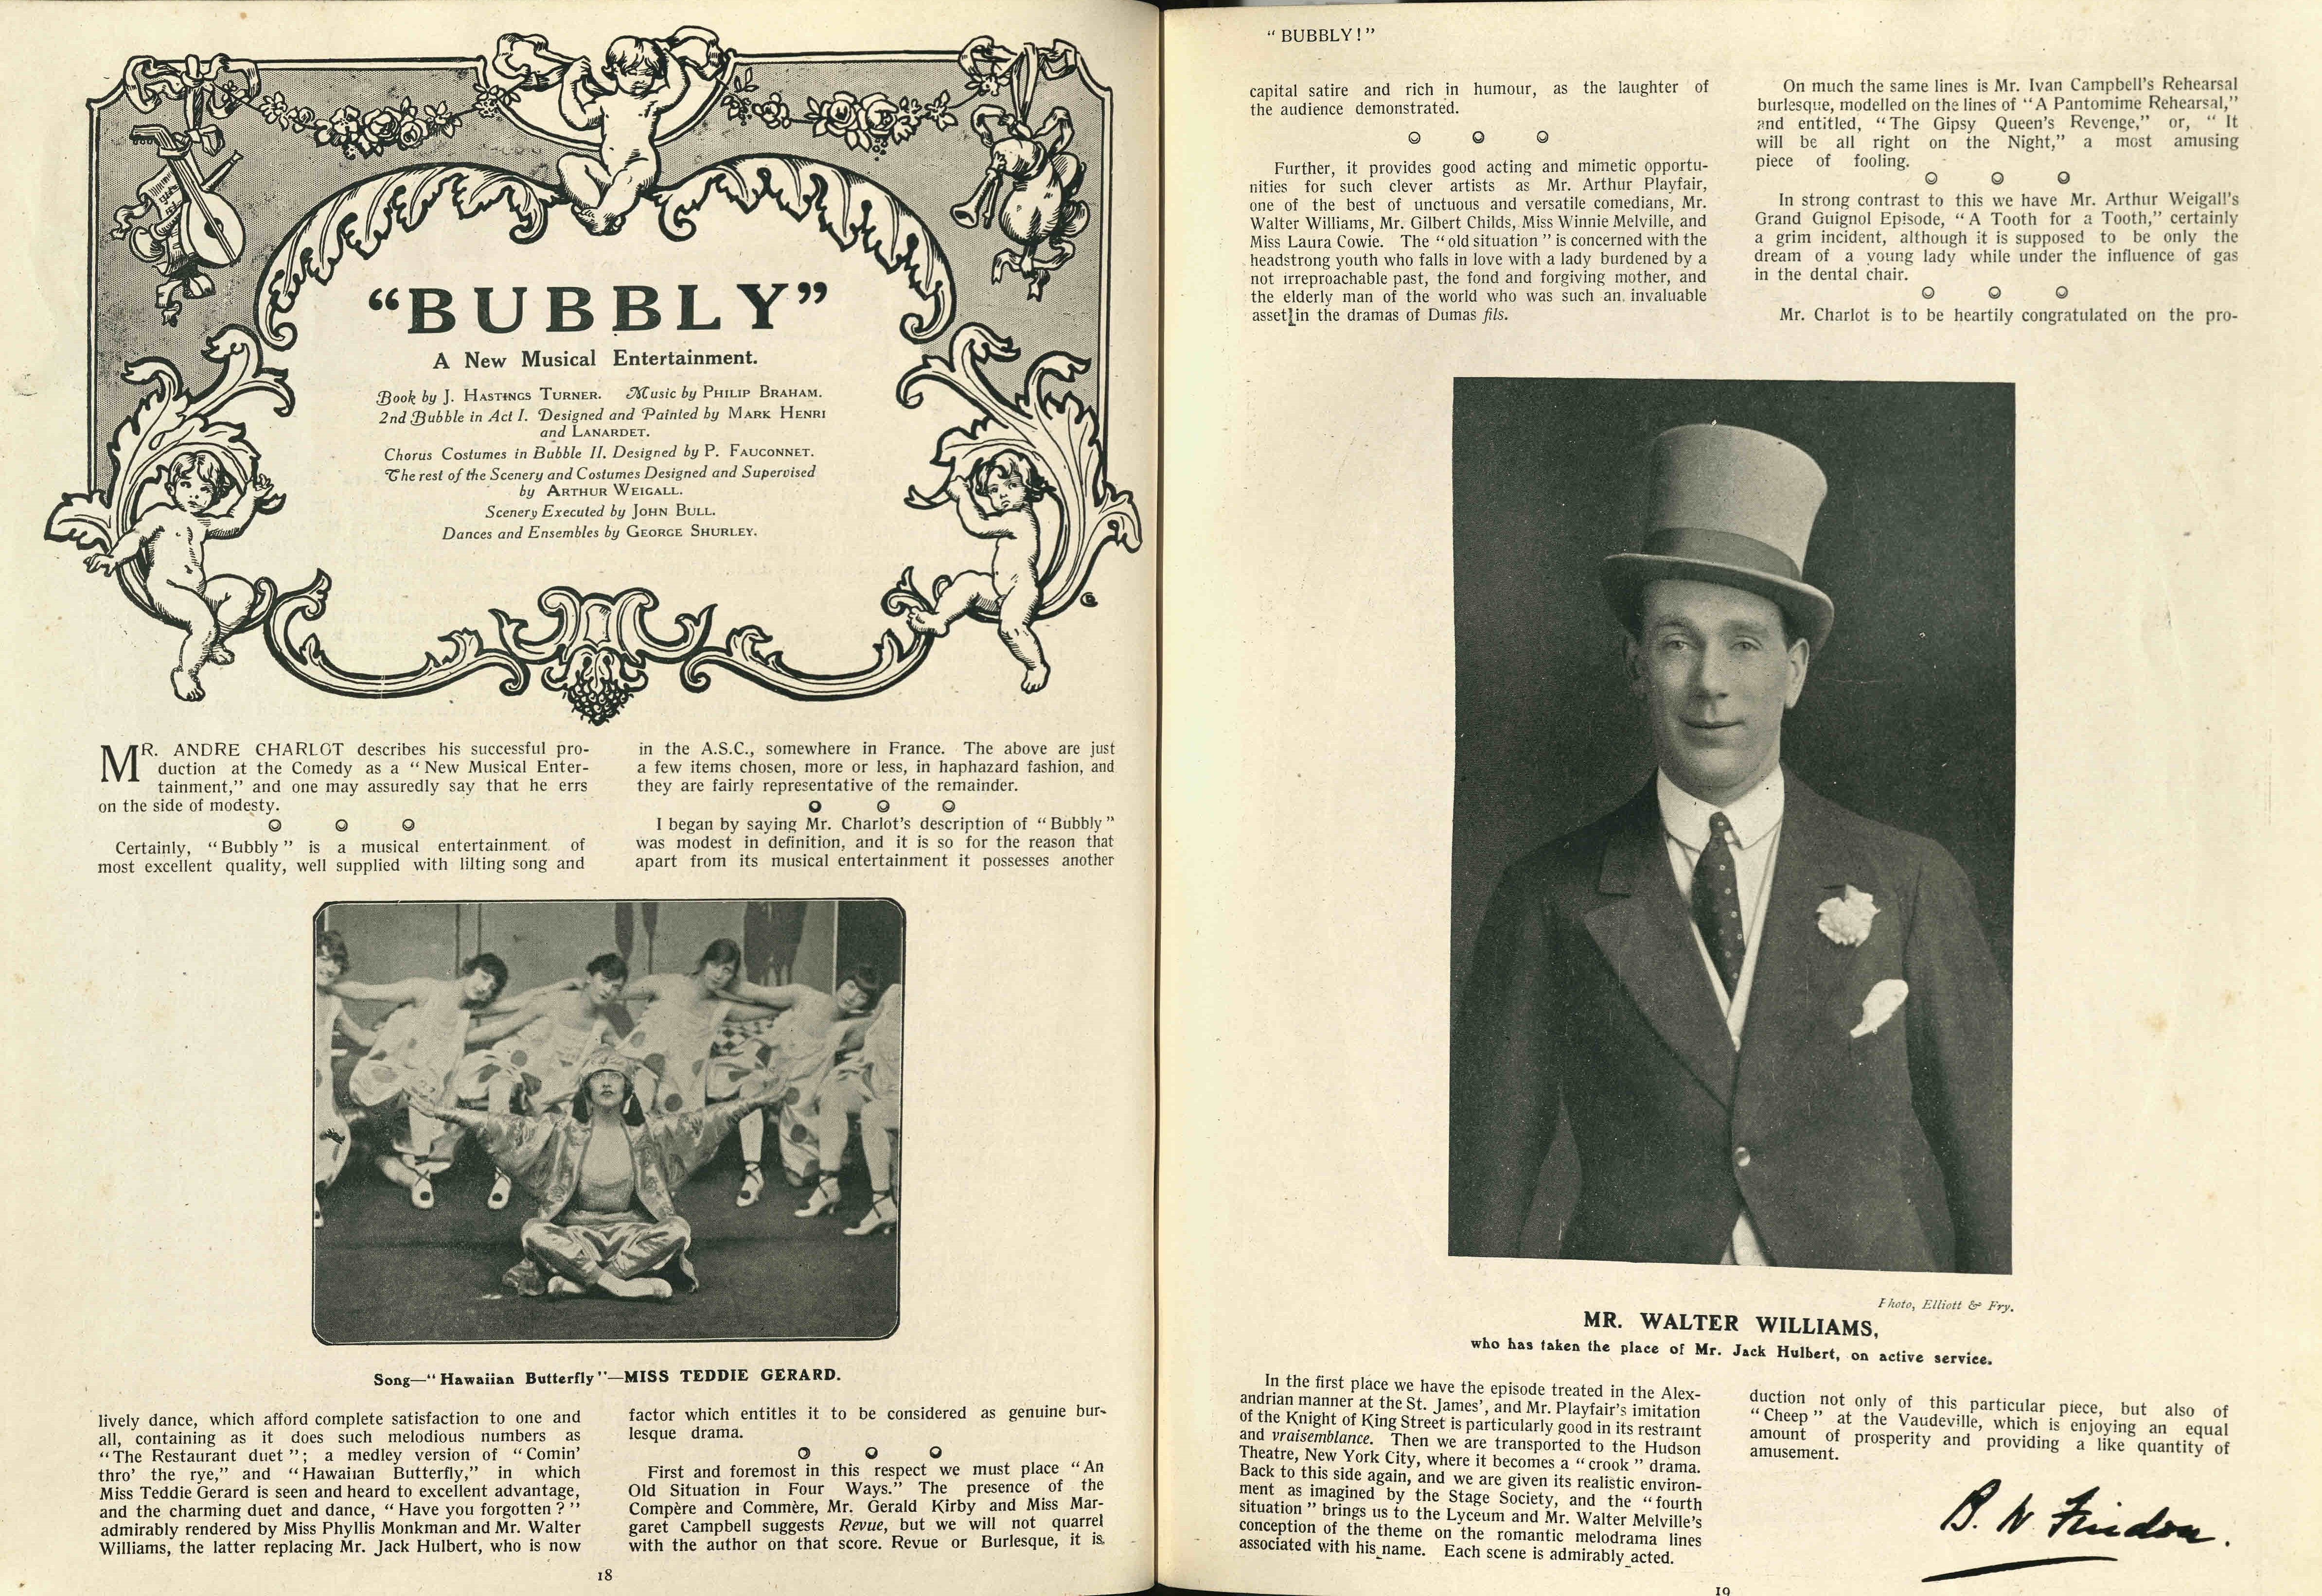 Extract from the Play Pictorial for Bubbly